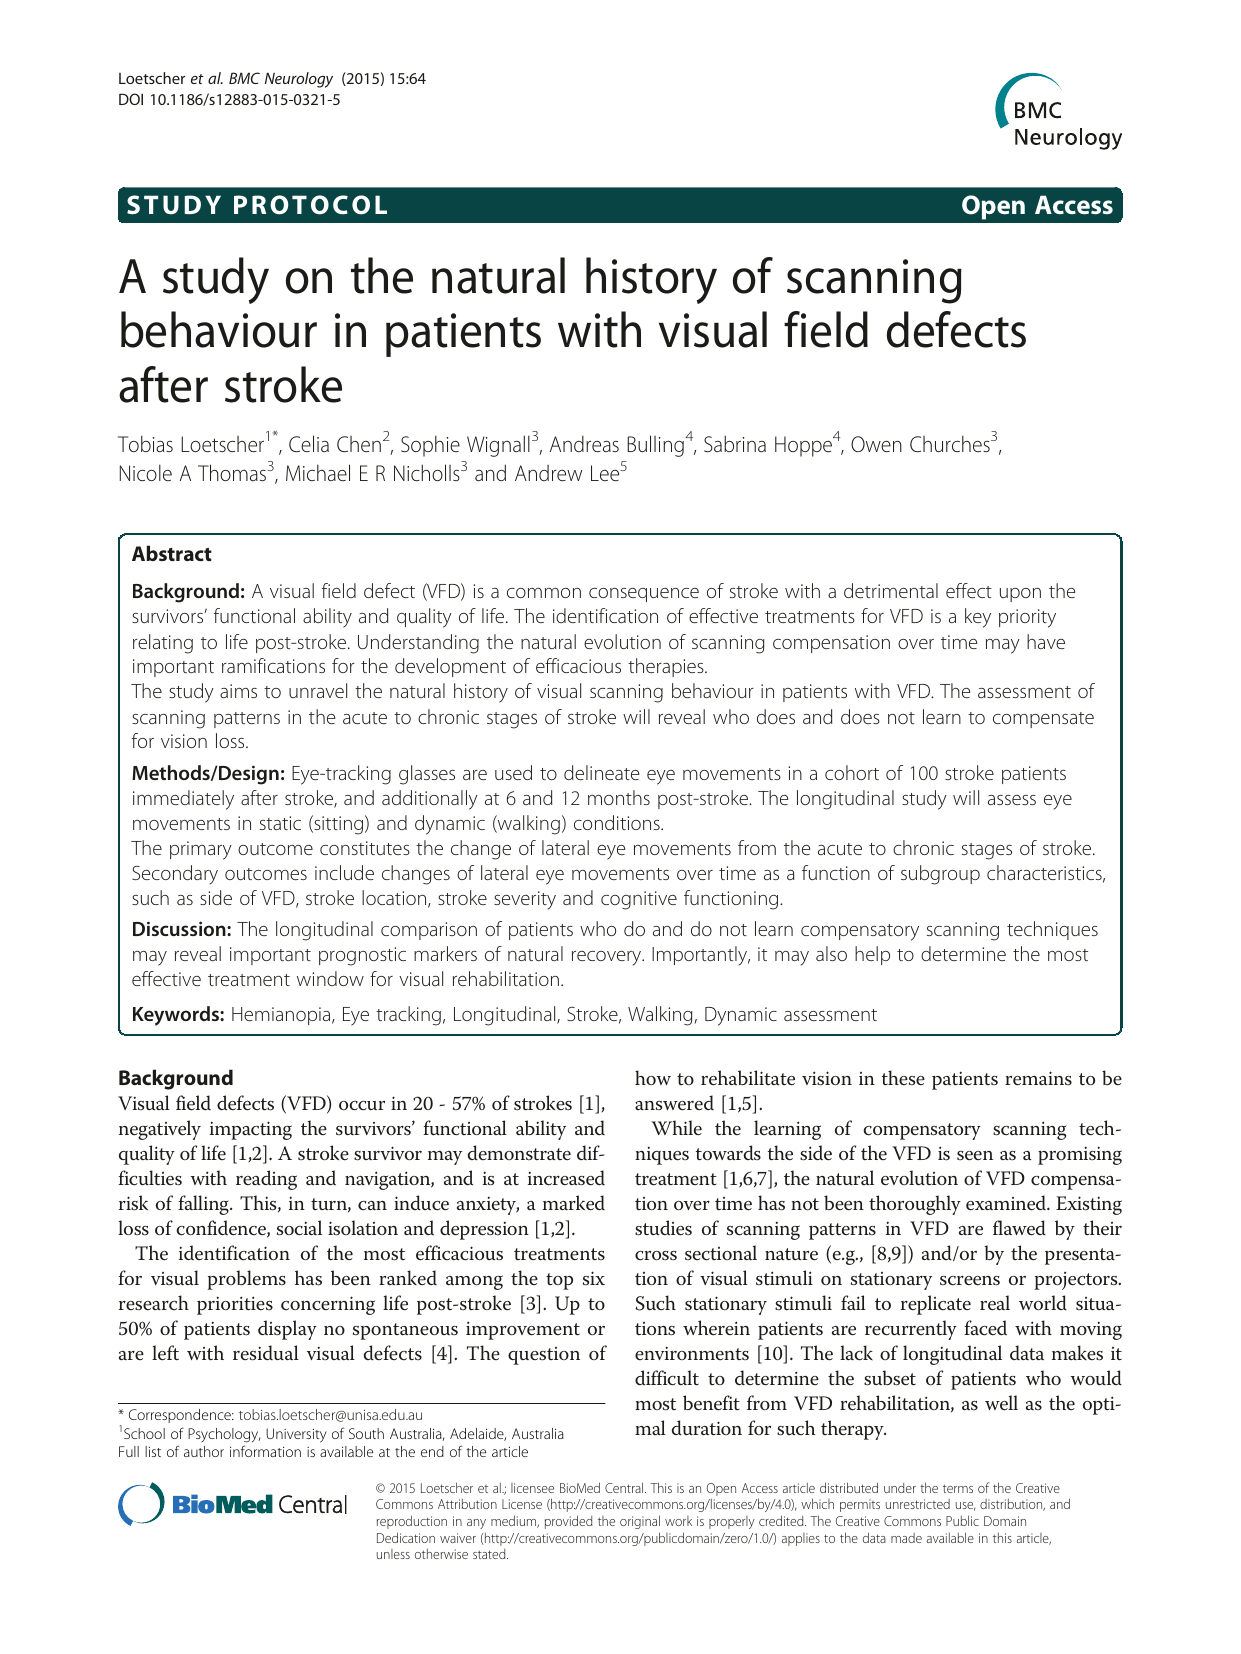 A study on the natural history of scanning behaviour in patients with visual field defects after stroke